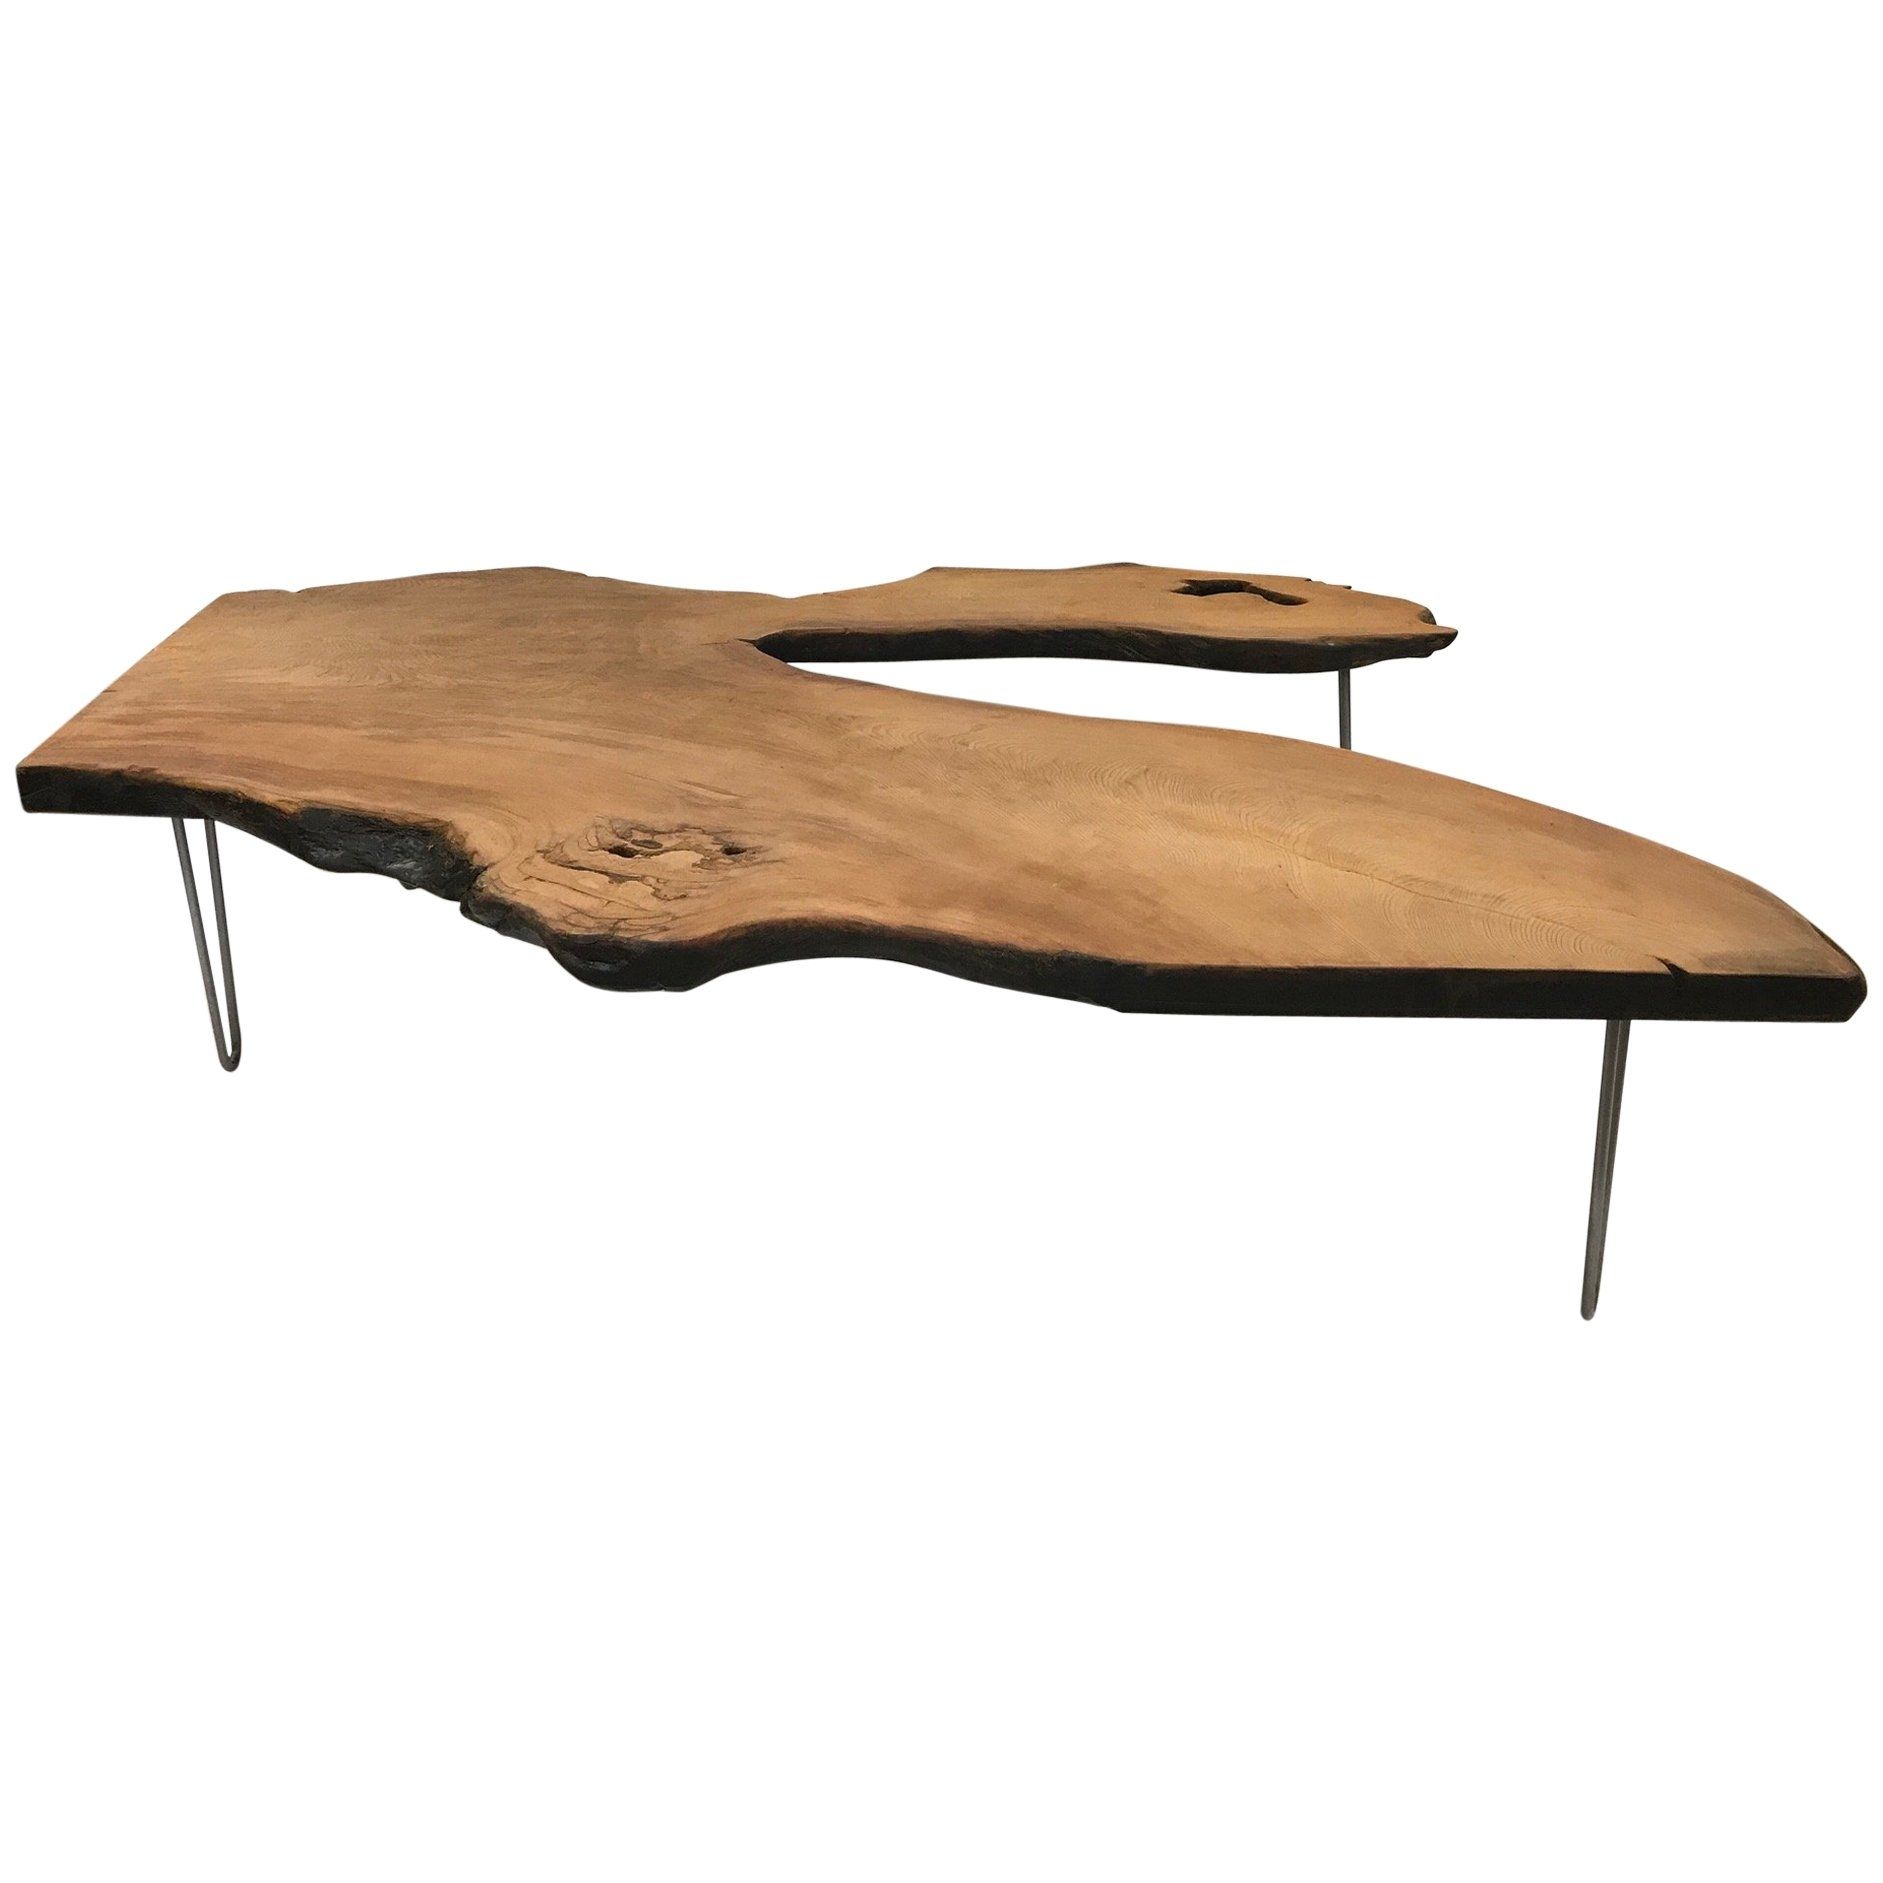 Large Organic Teak Live Edge Coffee Table For Sale At 1stdibs Intended For Live Edge Teak Coffee Tables (View 23 of 30)